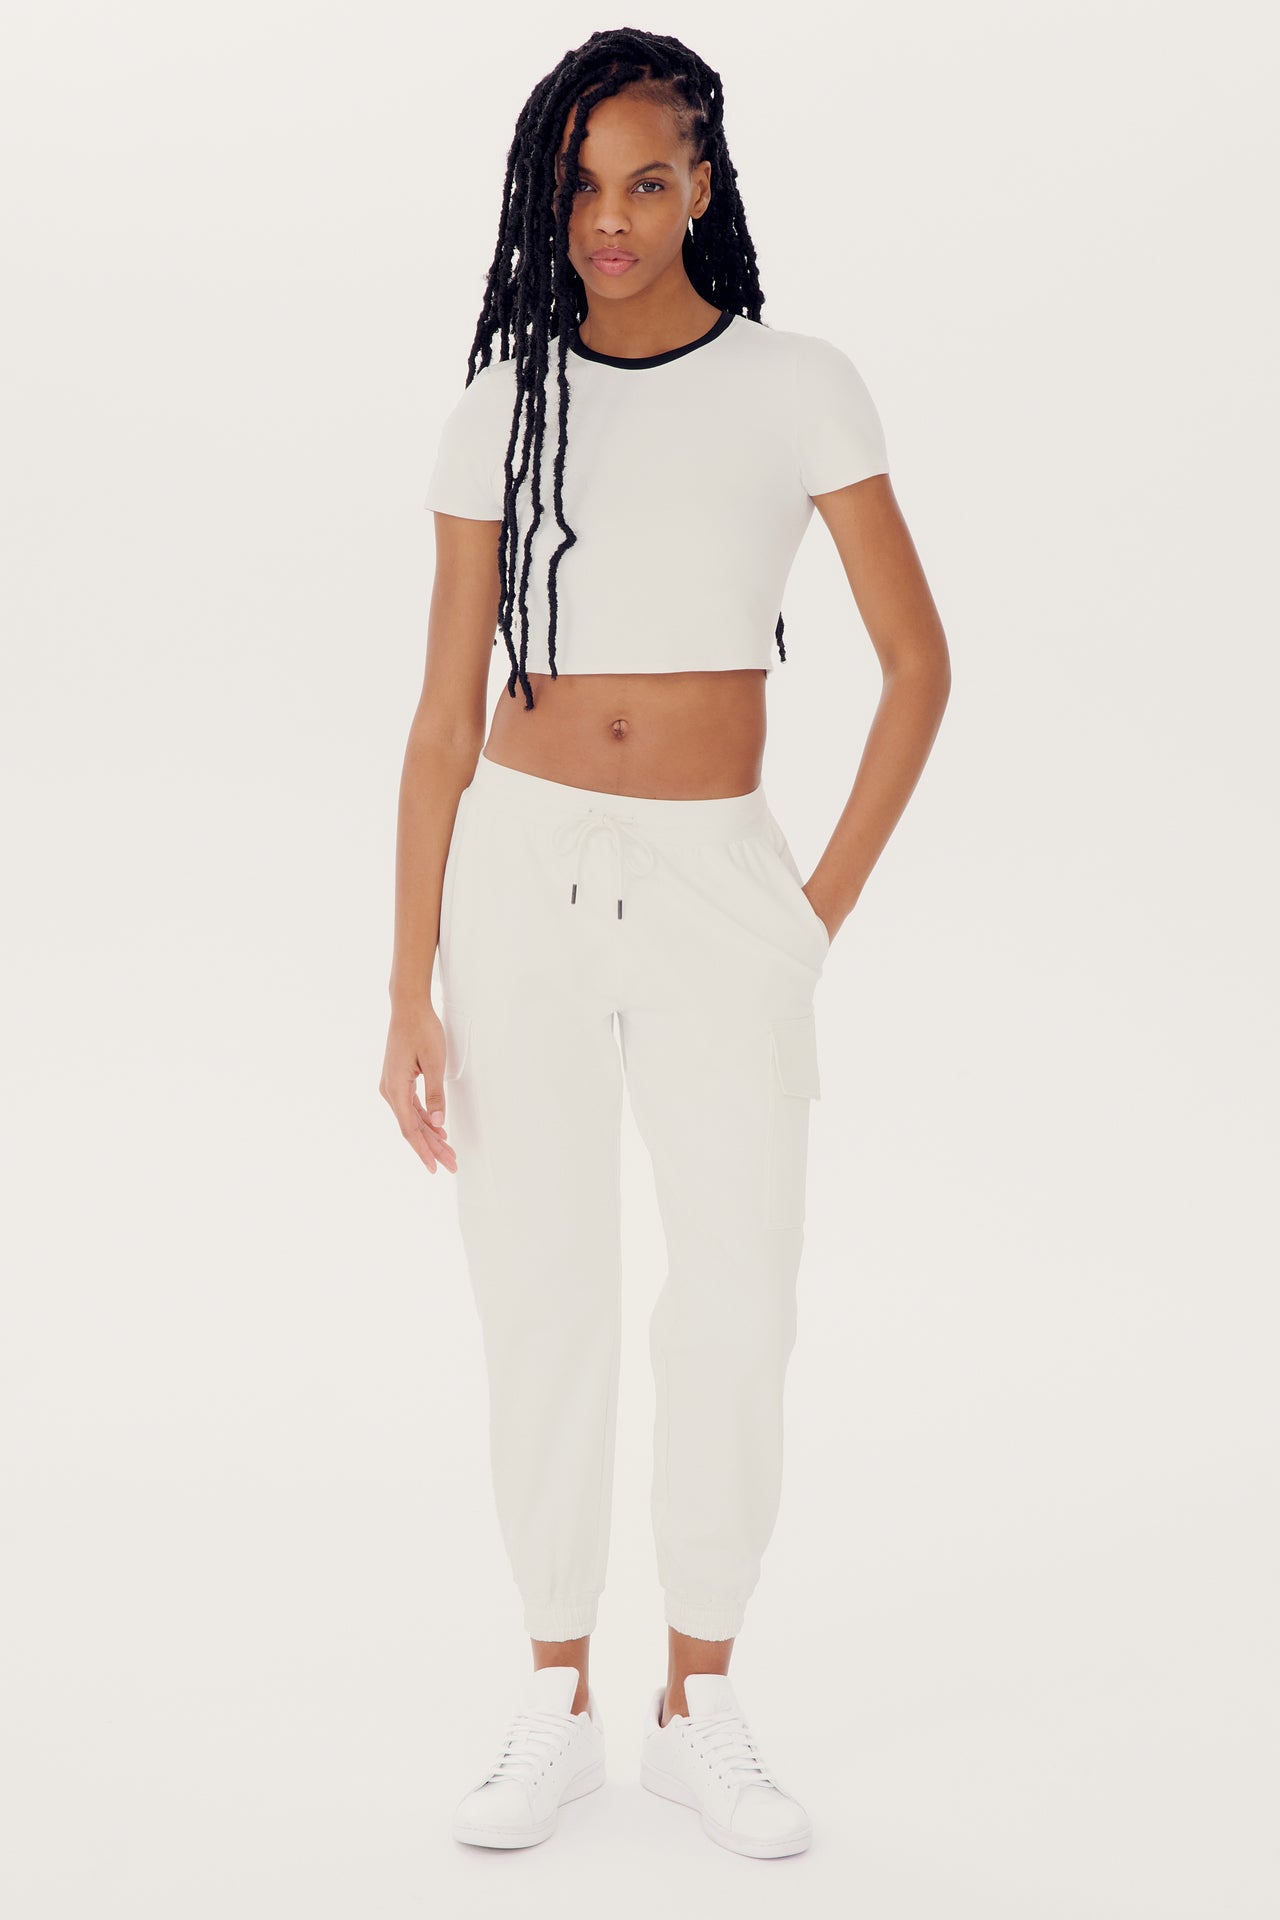 A person with long braided hair is wearing a white crop top and relaxed fit, mid-weight fabric SPLITS59 Supplex Cargo Pant - White, paired with white sneakers, standing against a plain white background.